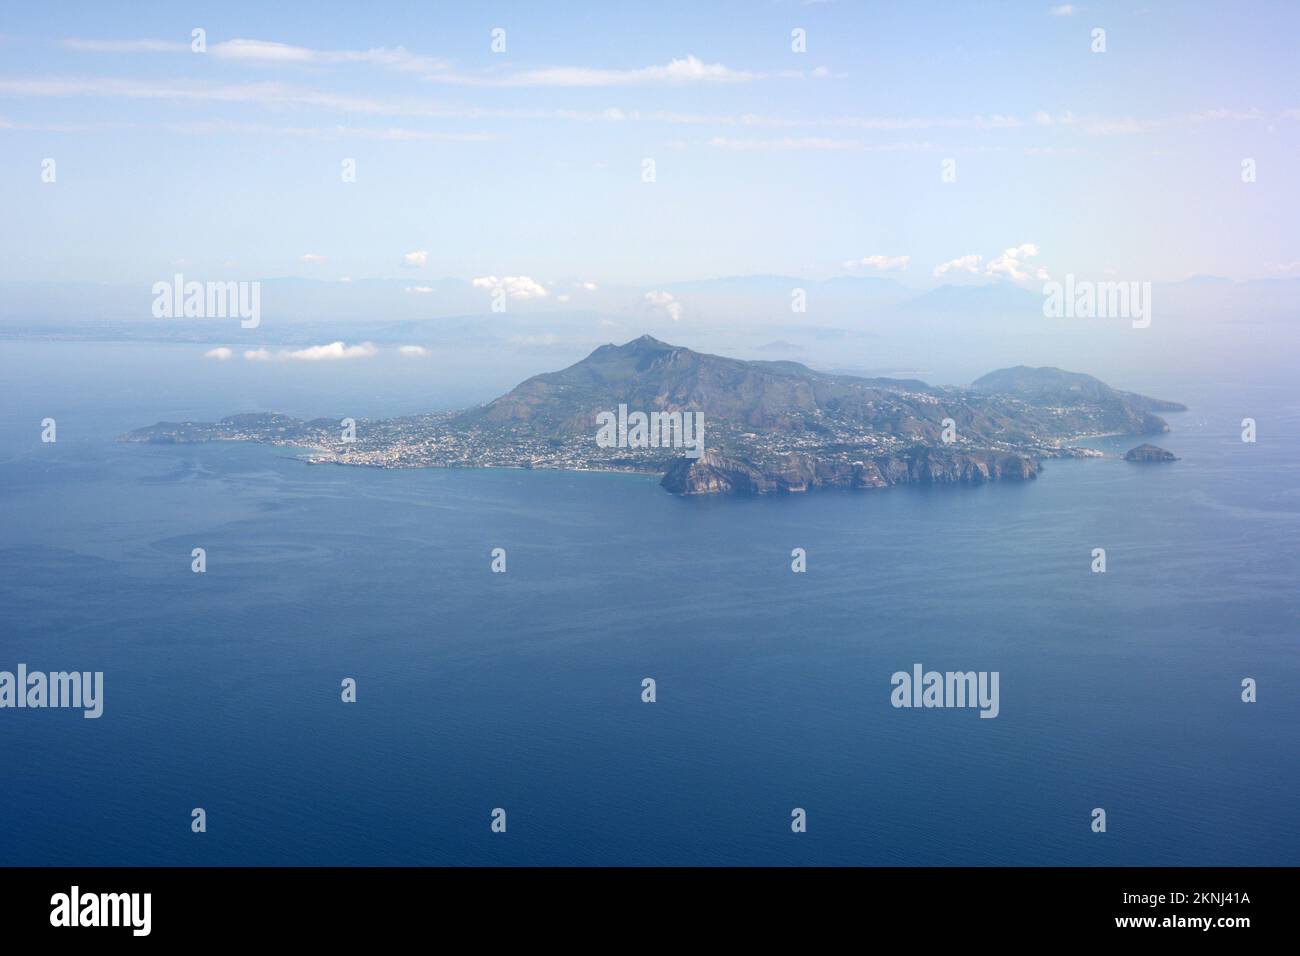 An aerial view of the western side of the Italian island of Ischia and the town of Forio in the Gulf of Naples, Phlegrean Islands, Campania, Italy. Stock Photo